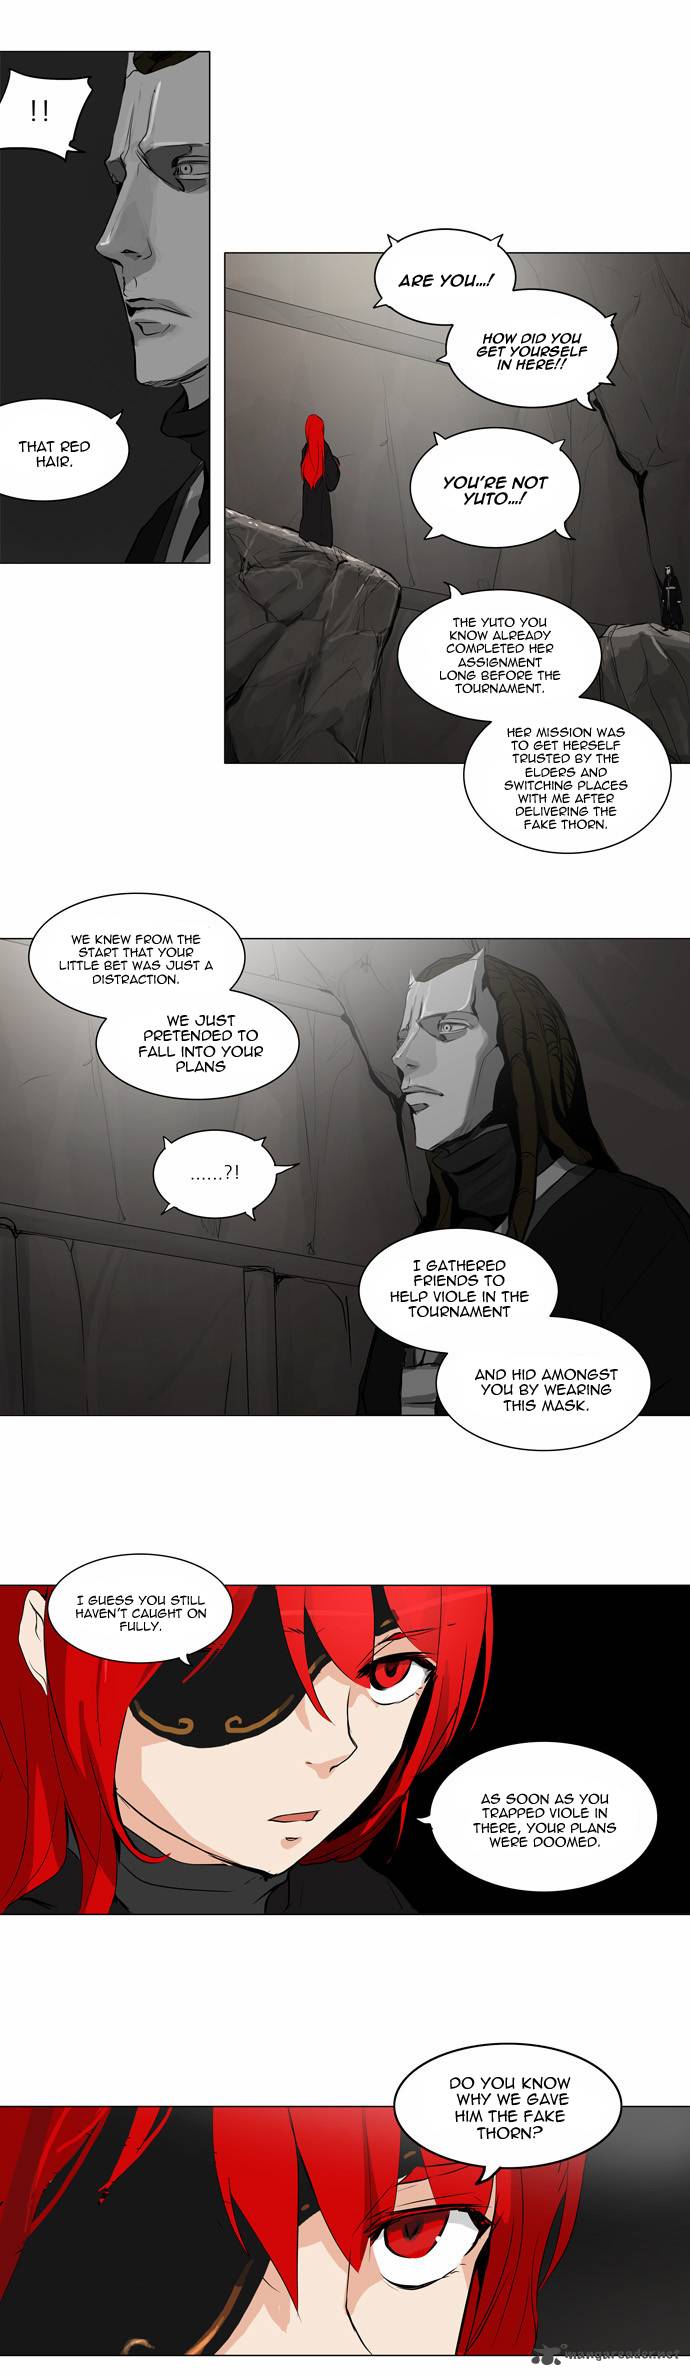 Tower Of God 170 10